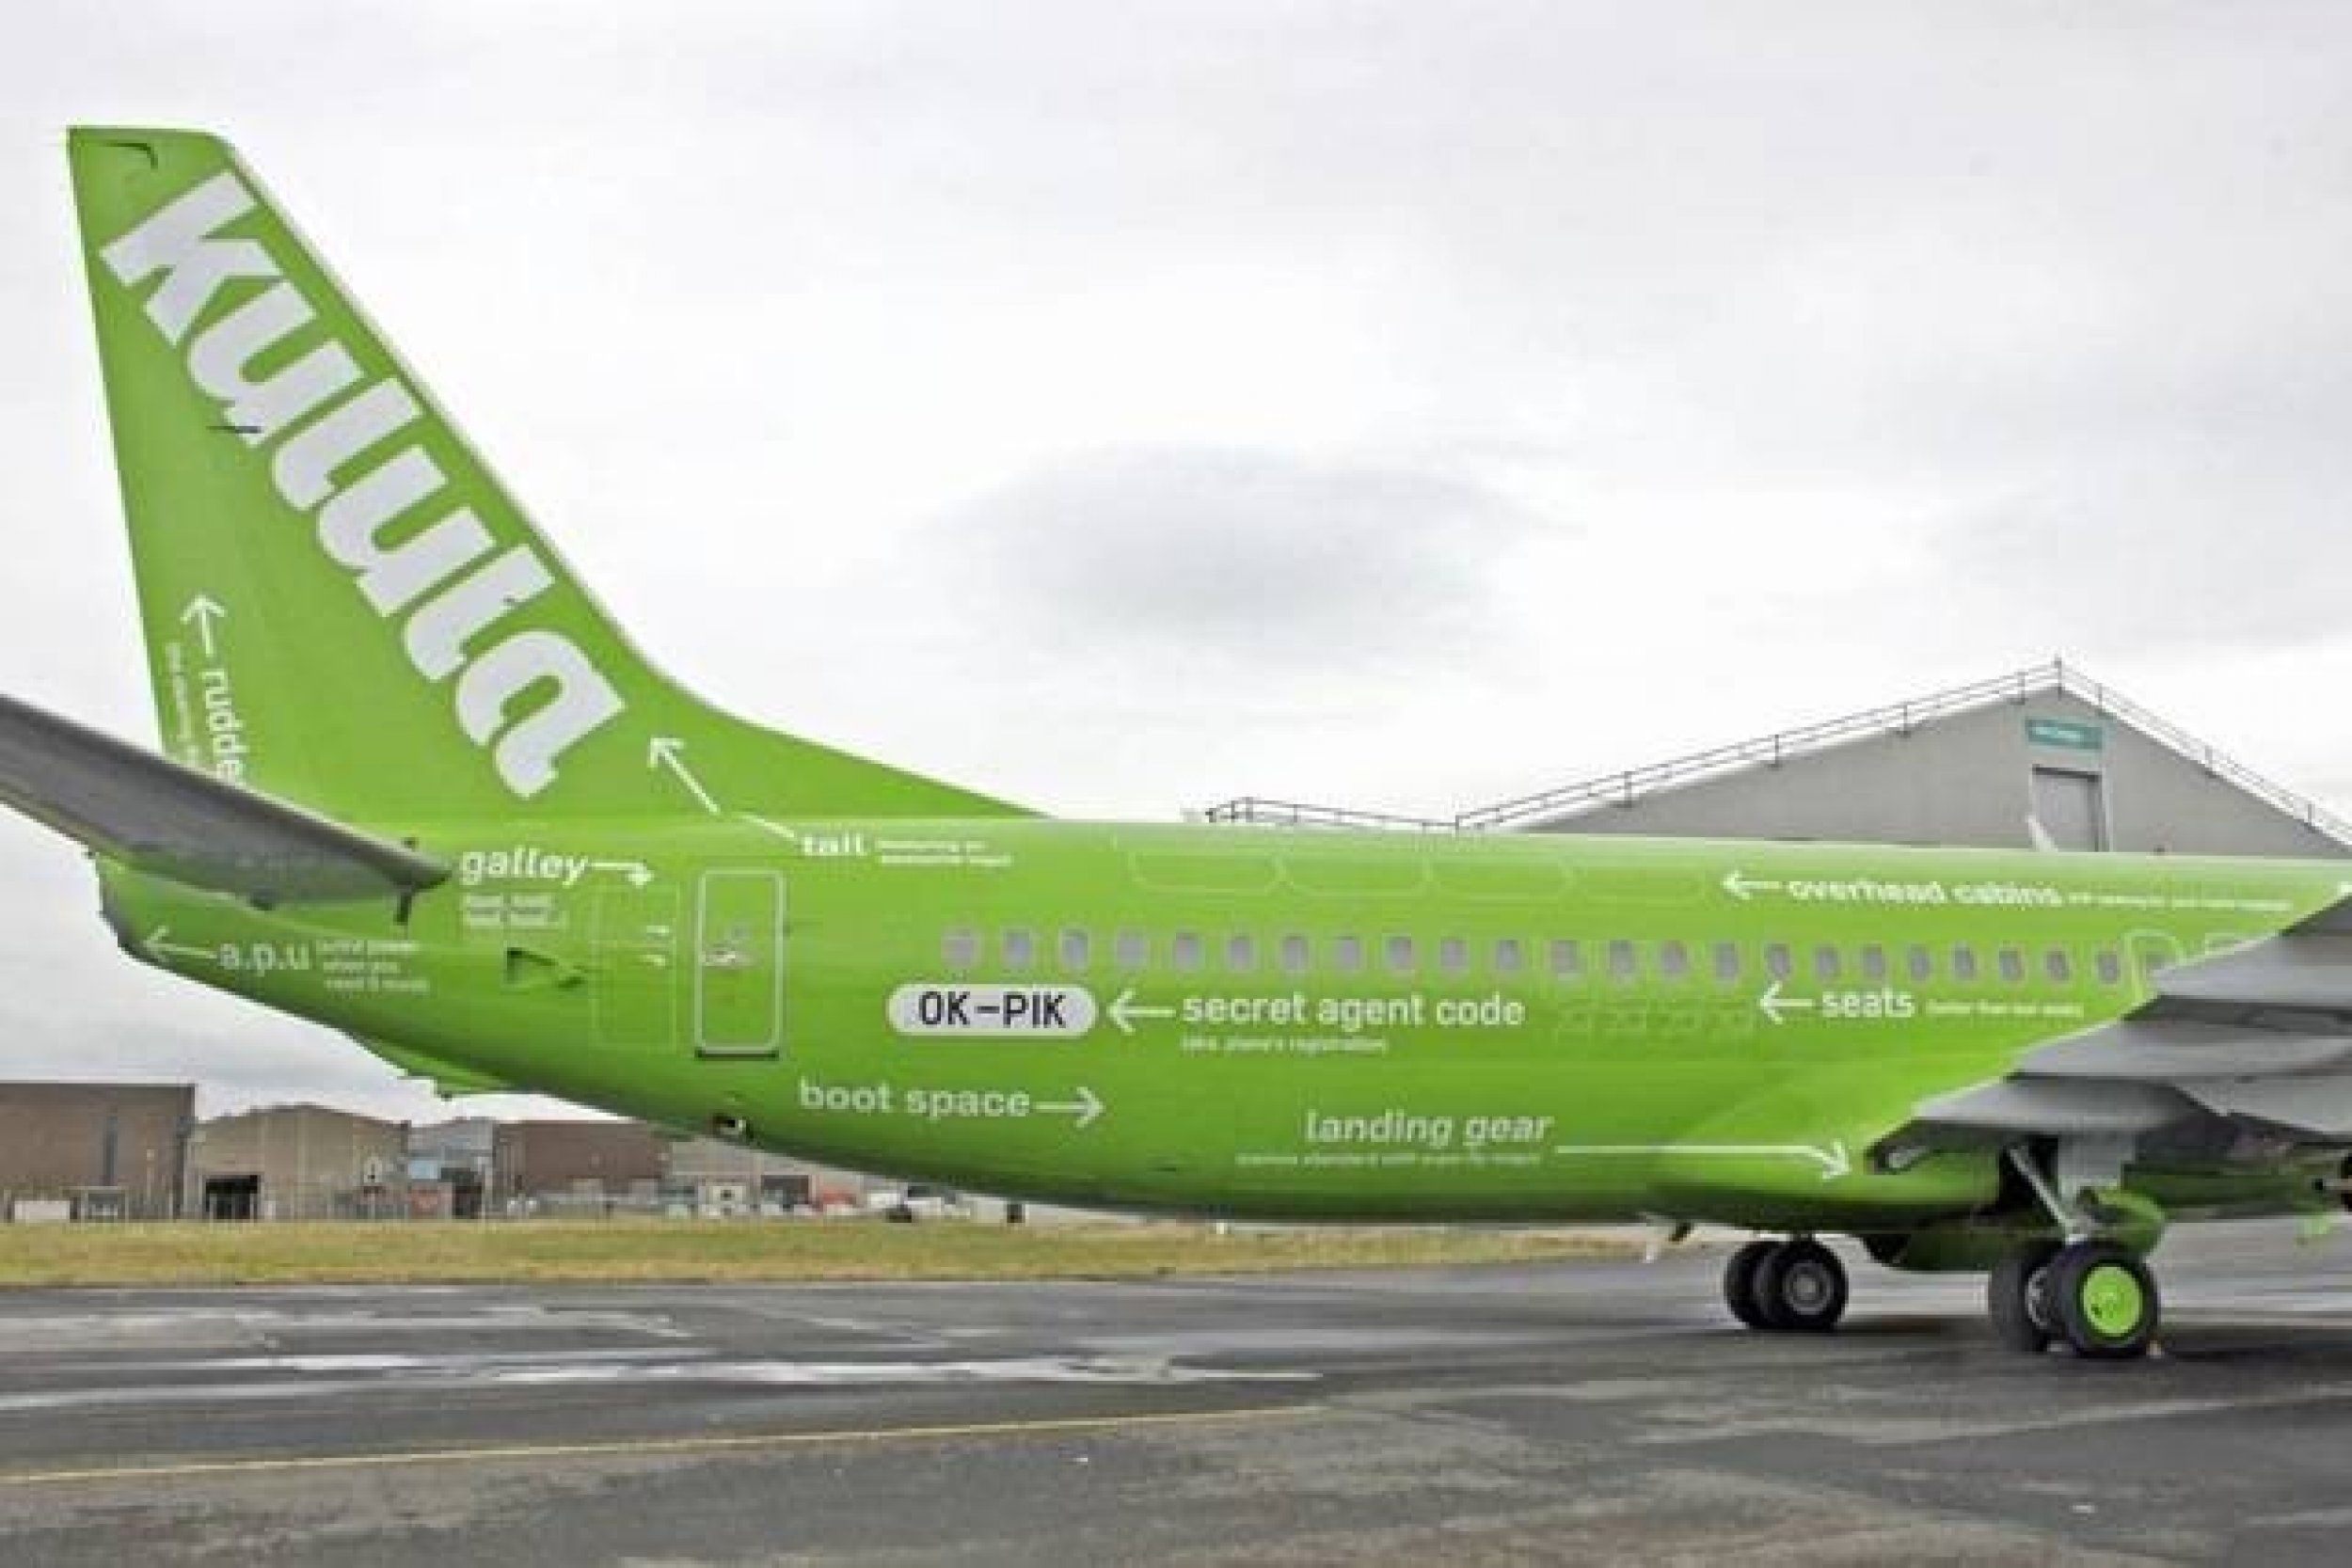 In case you didnt know the different parts of an airplane, Kulula Airlines has marked its own jet to tell you what everything is. Another view from the right side of the plane, which shows the rear galley, the quotsecret agent code,quot and where the